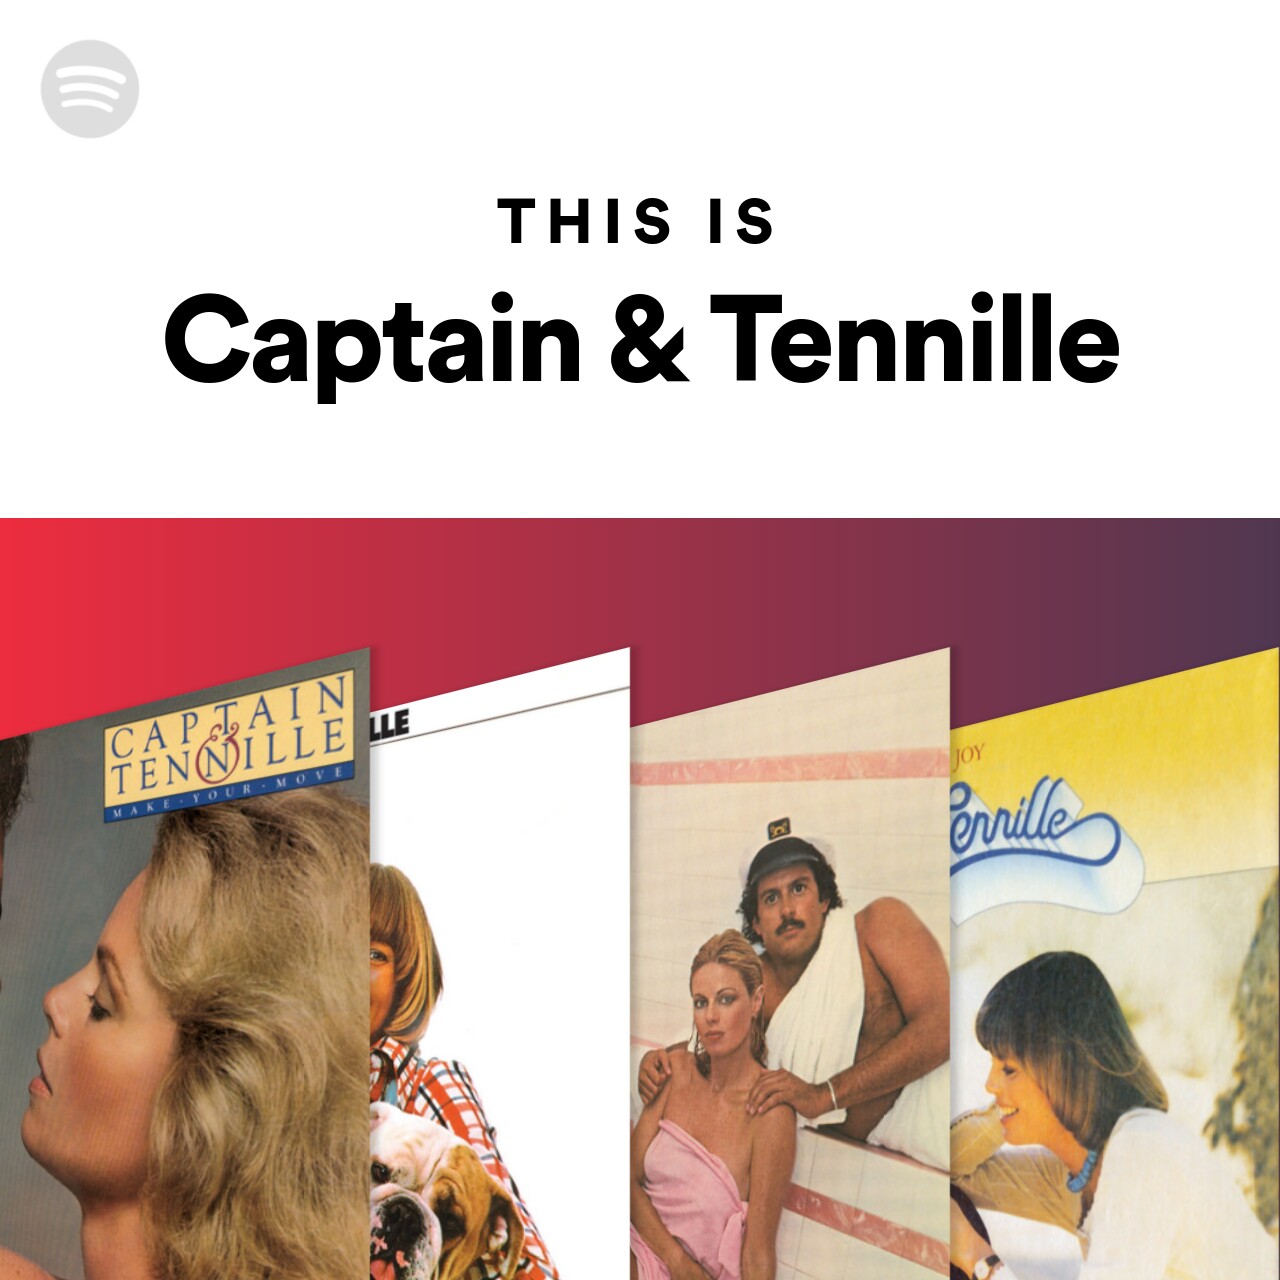 This Is Captain & Tennille